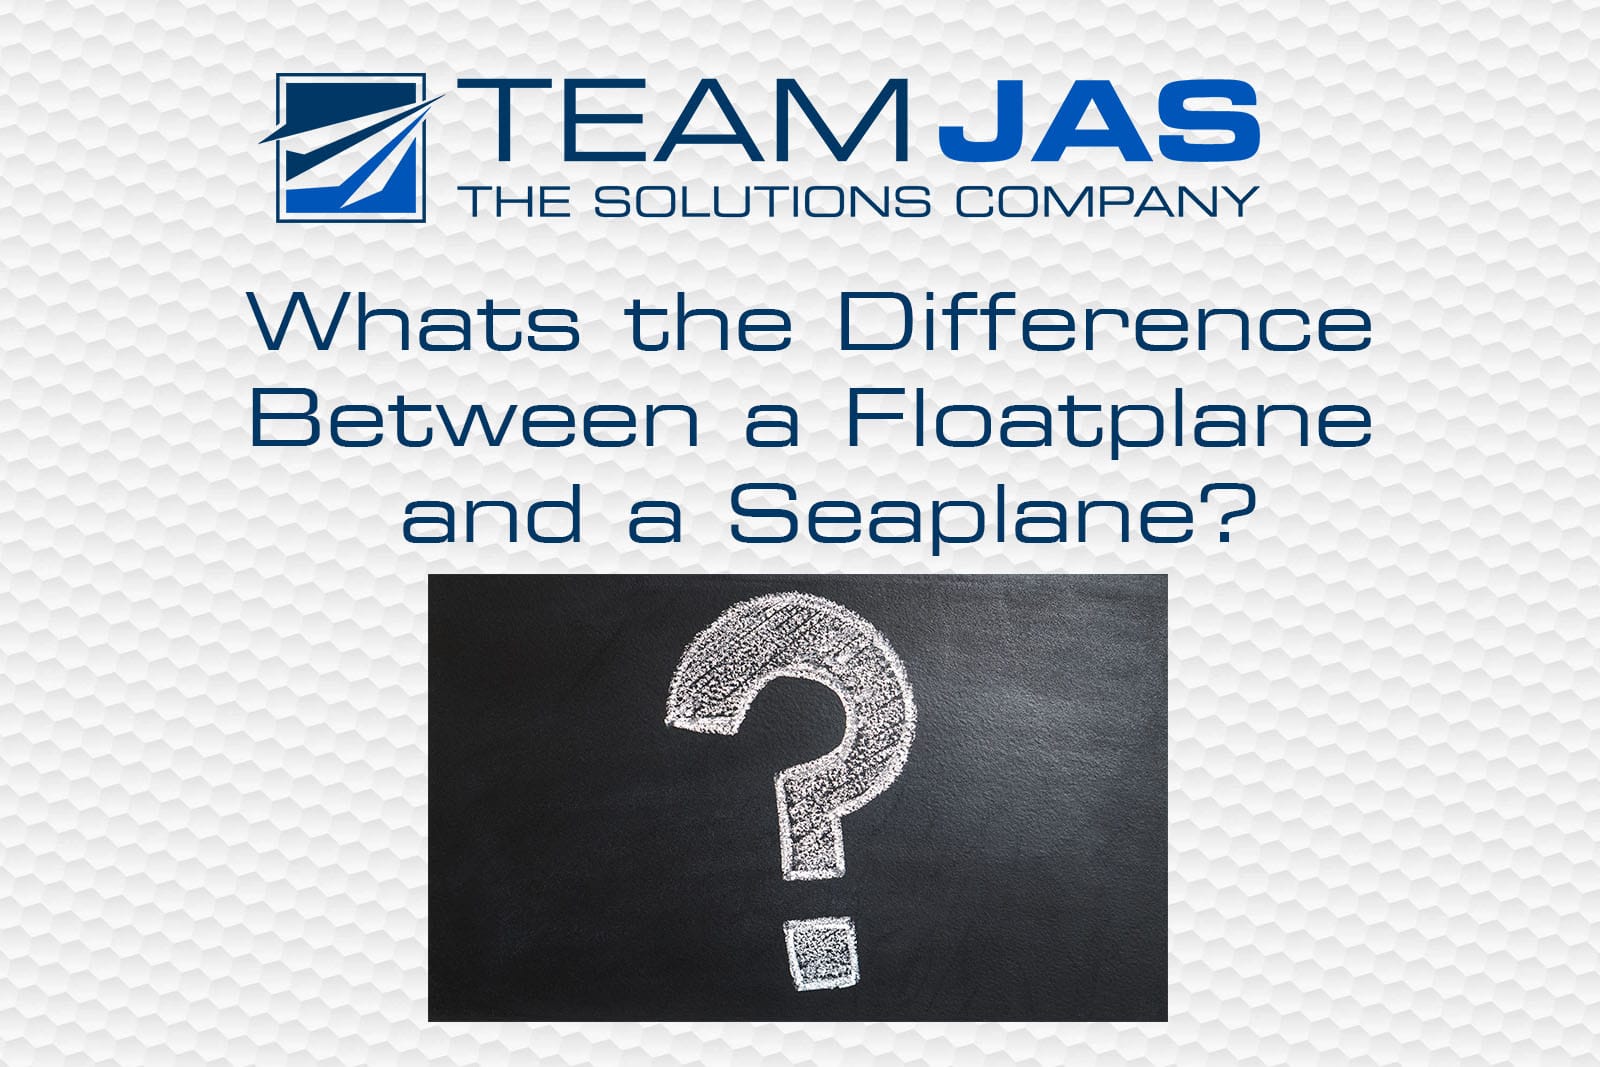 Floatplane vs Seaplane - What's the Difference?